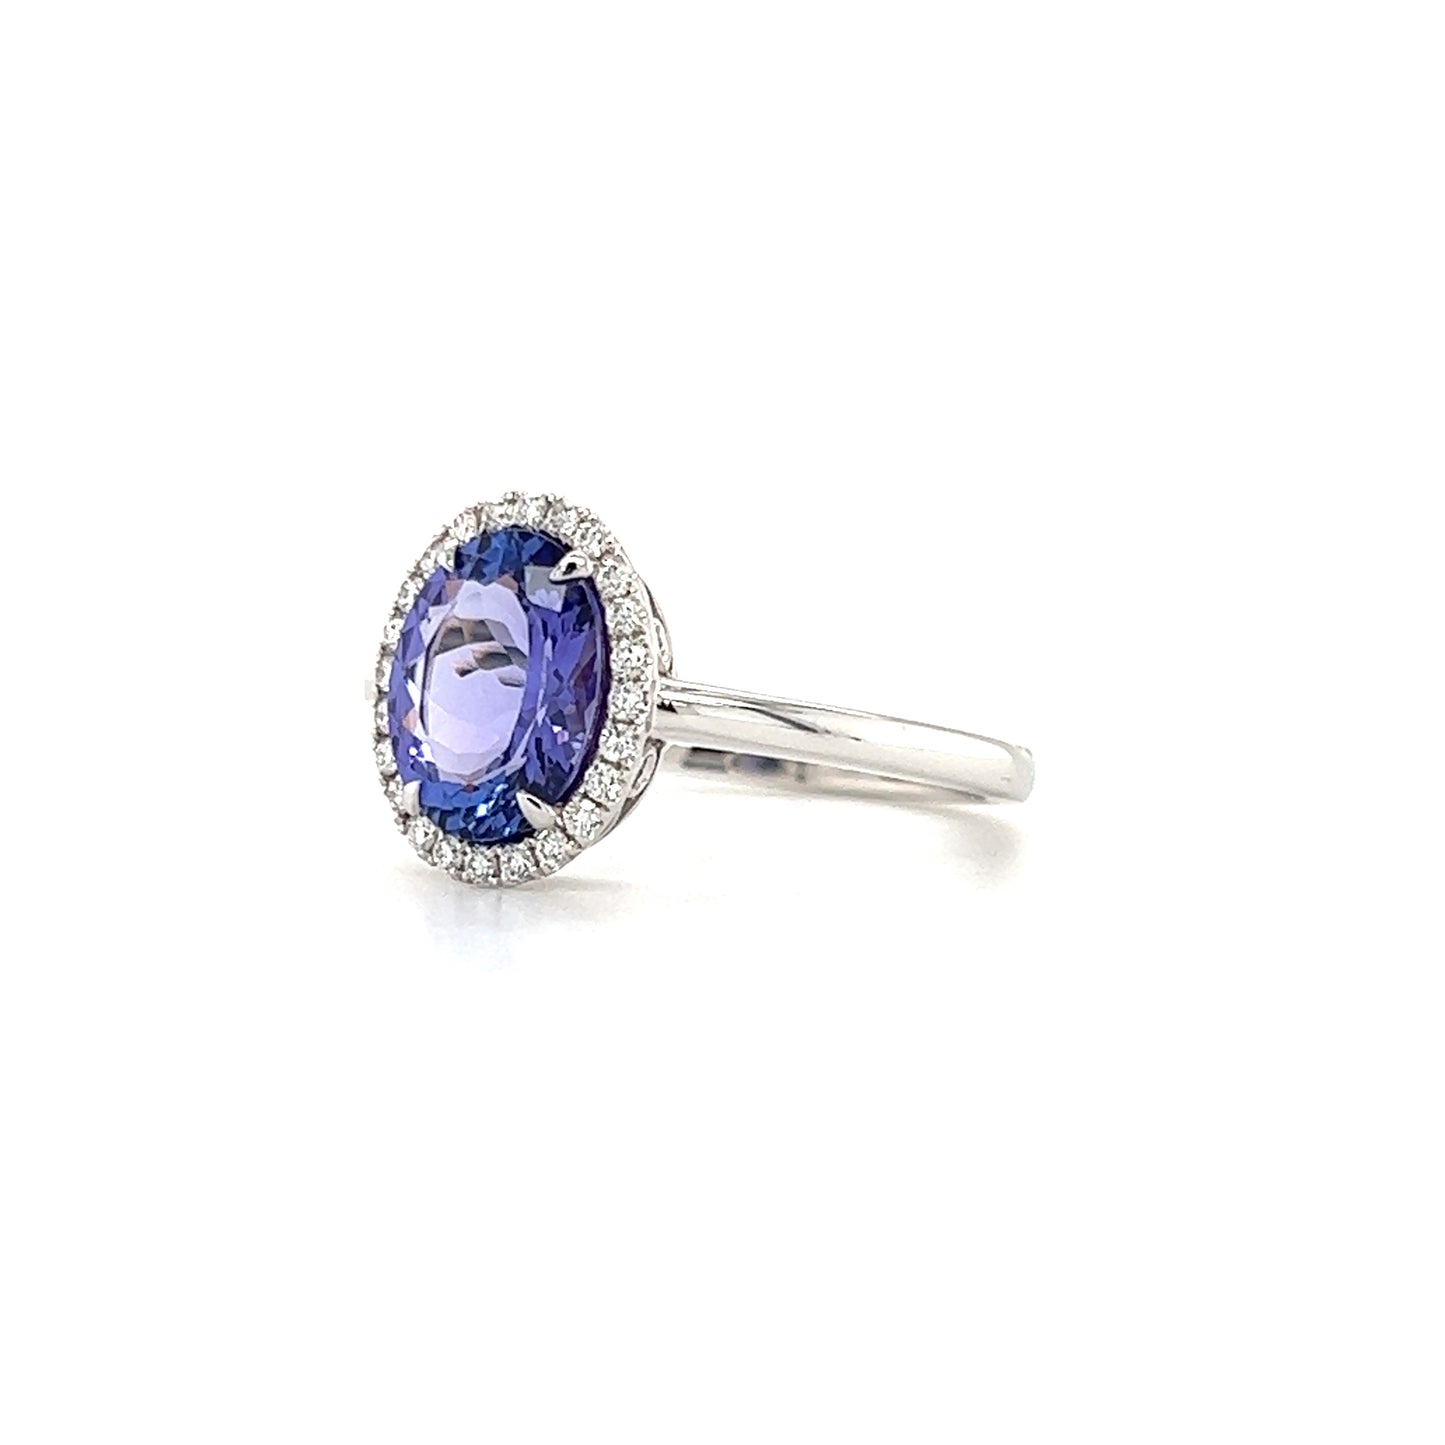 Oval Tanzanite Ring with 1.75ctw of Tanzanite and Diamond Halo in 14K White Gold Right Side View